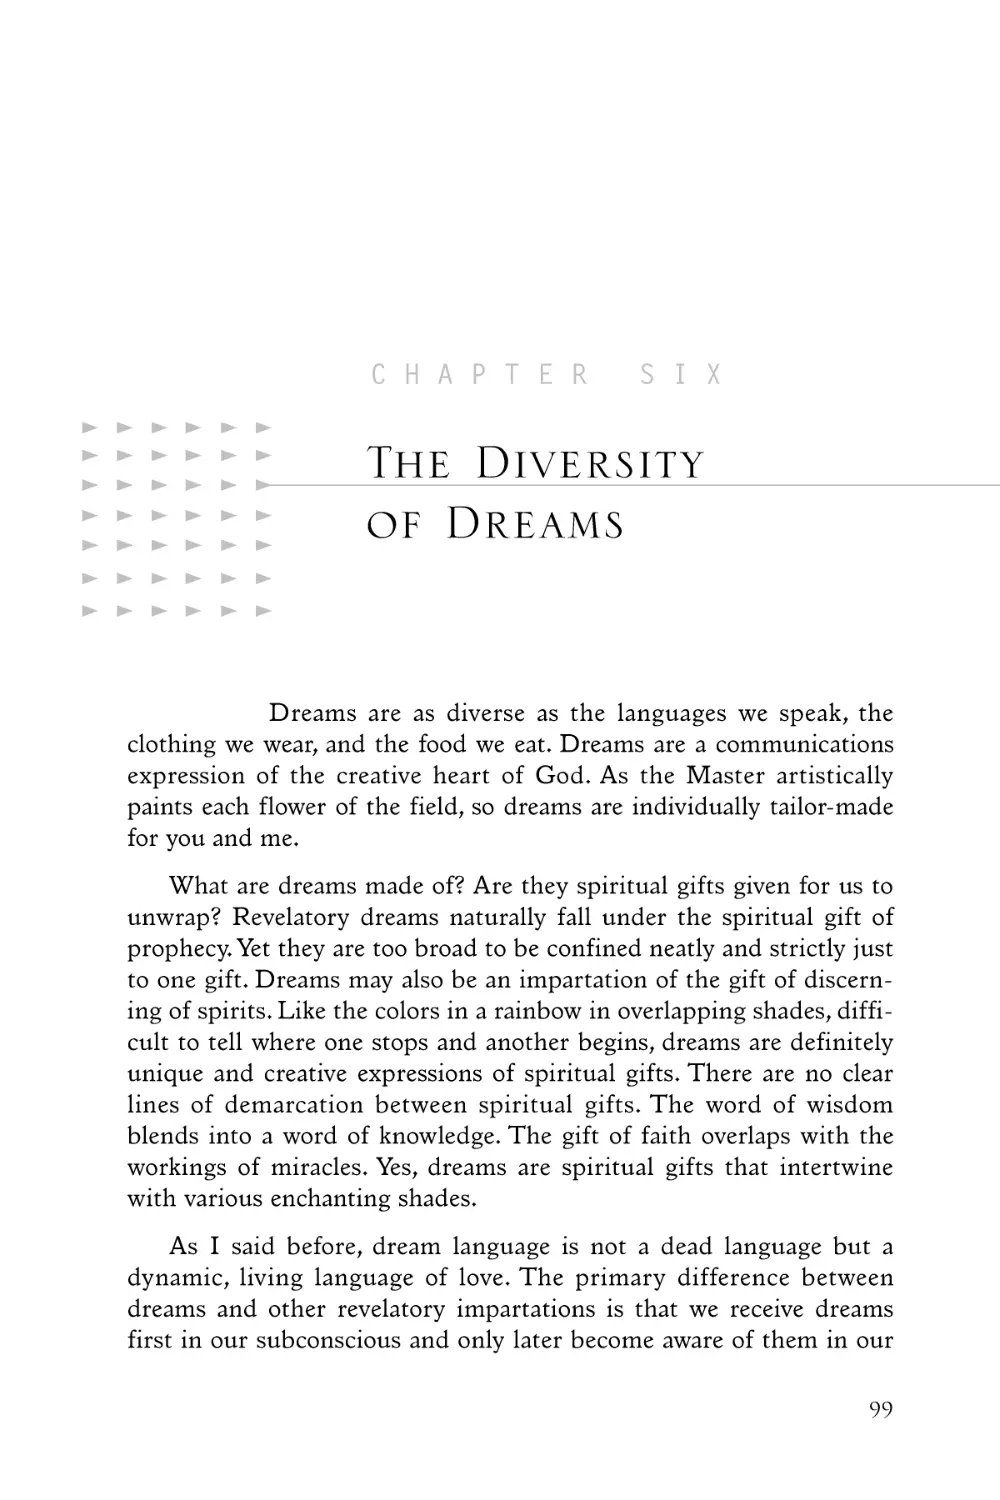 The Diversity of Dreams